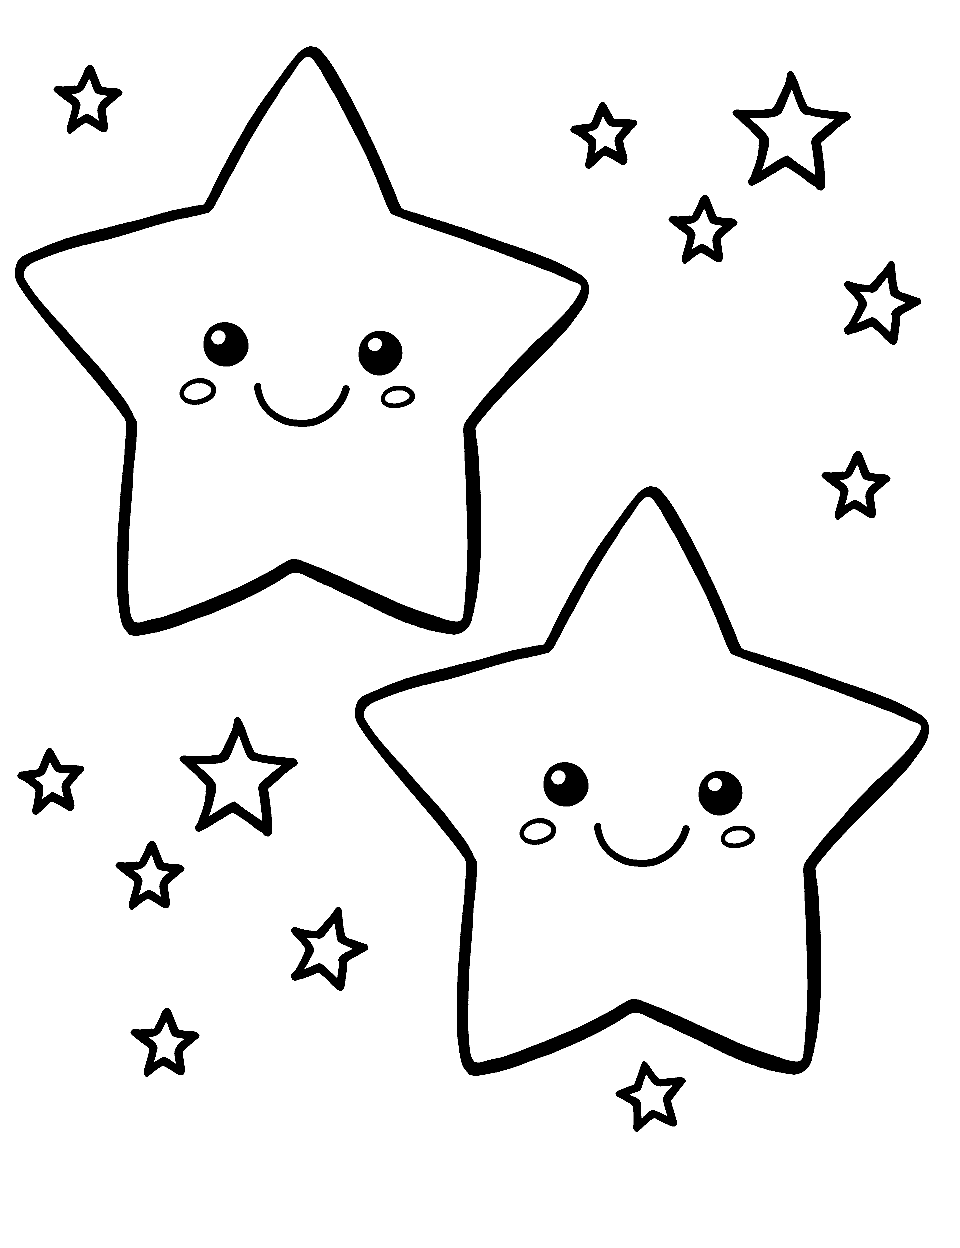 Twin Stars Star Coloring Page - Two identical stars side by side, with matching expressions and details.